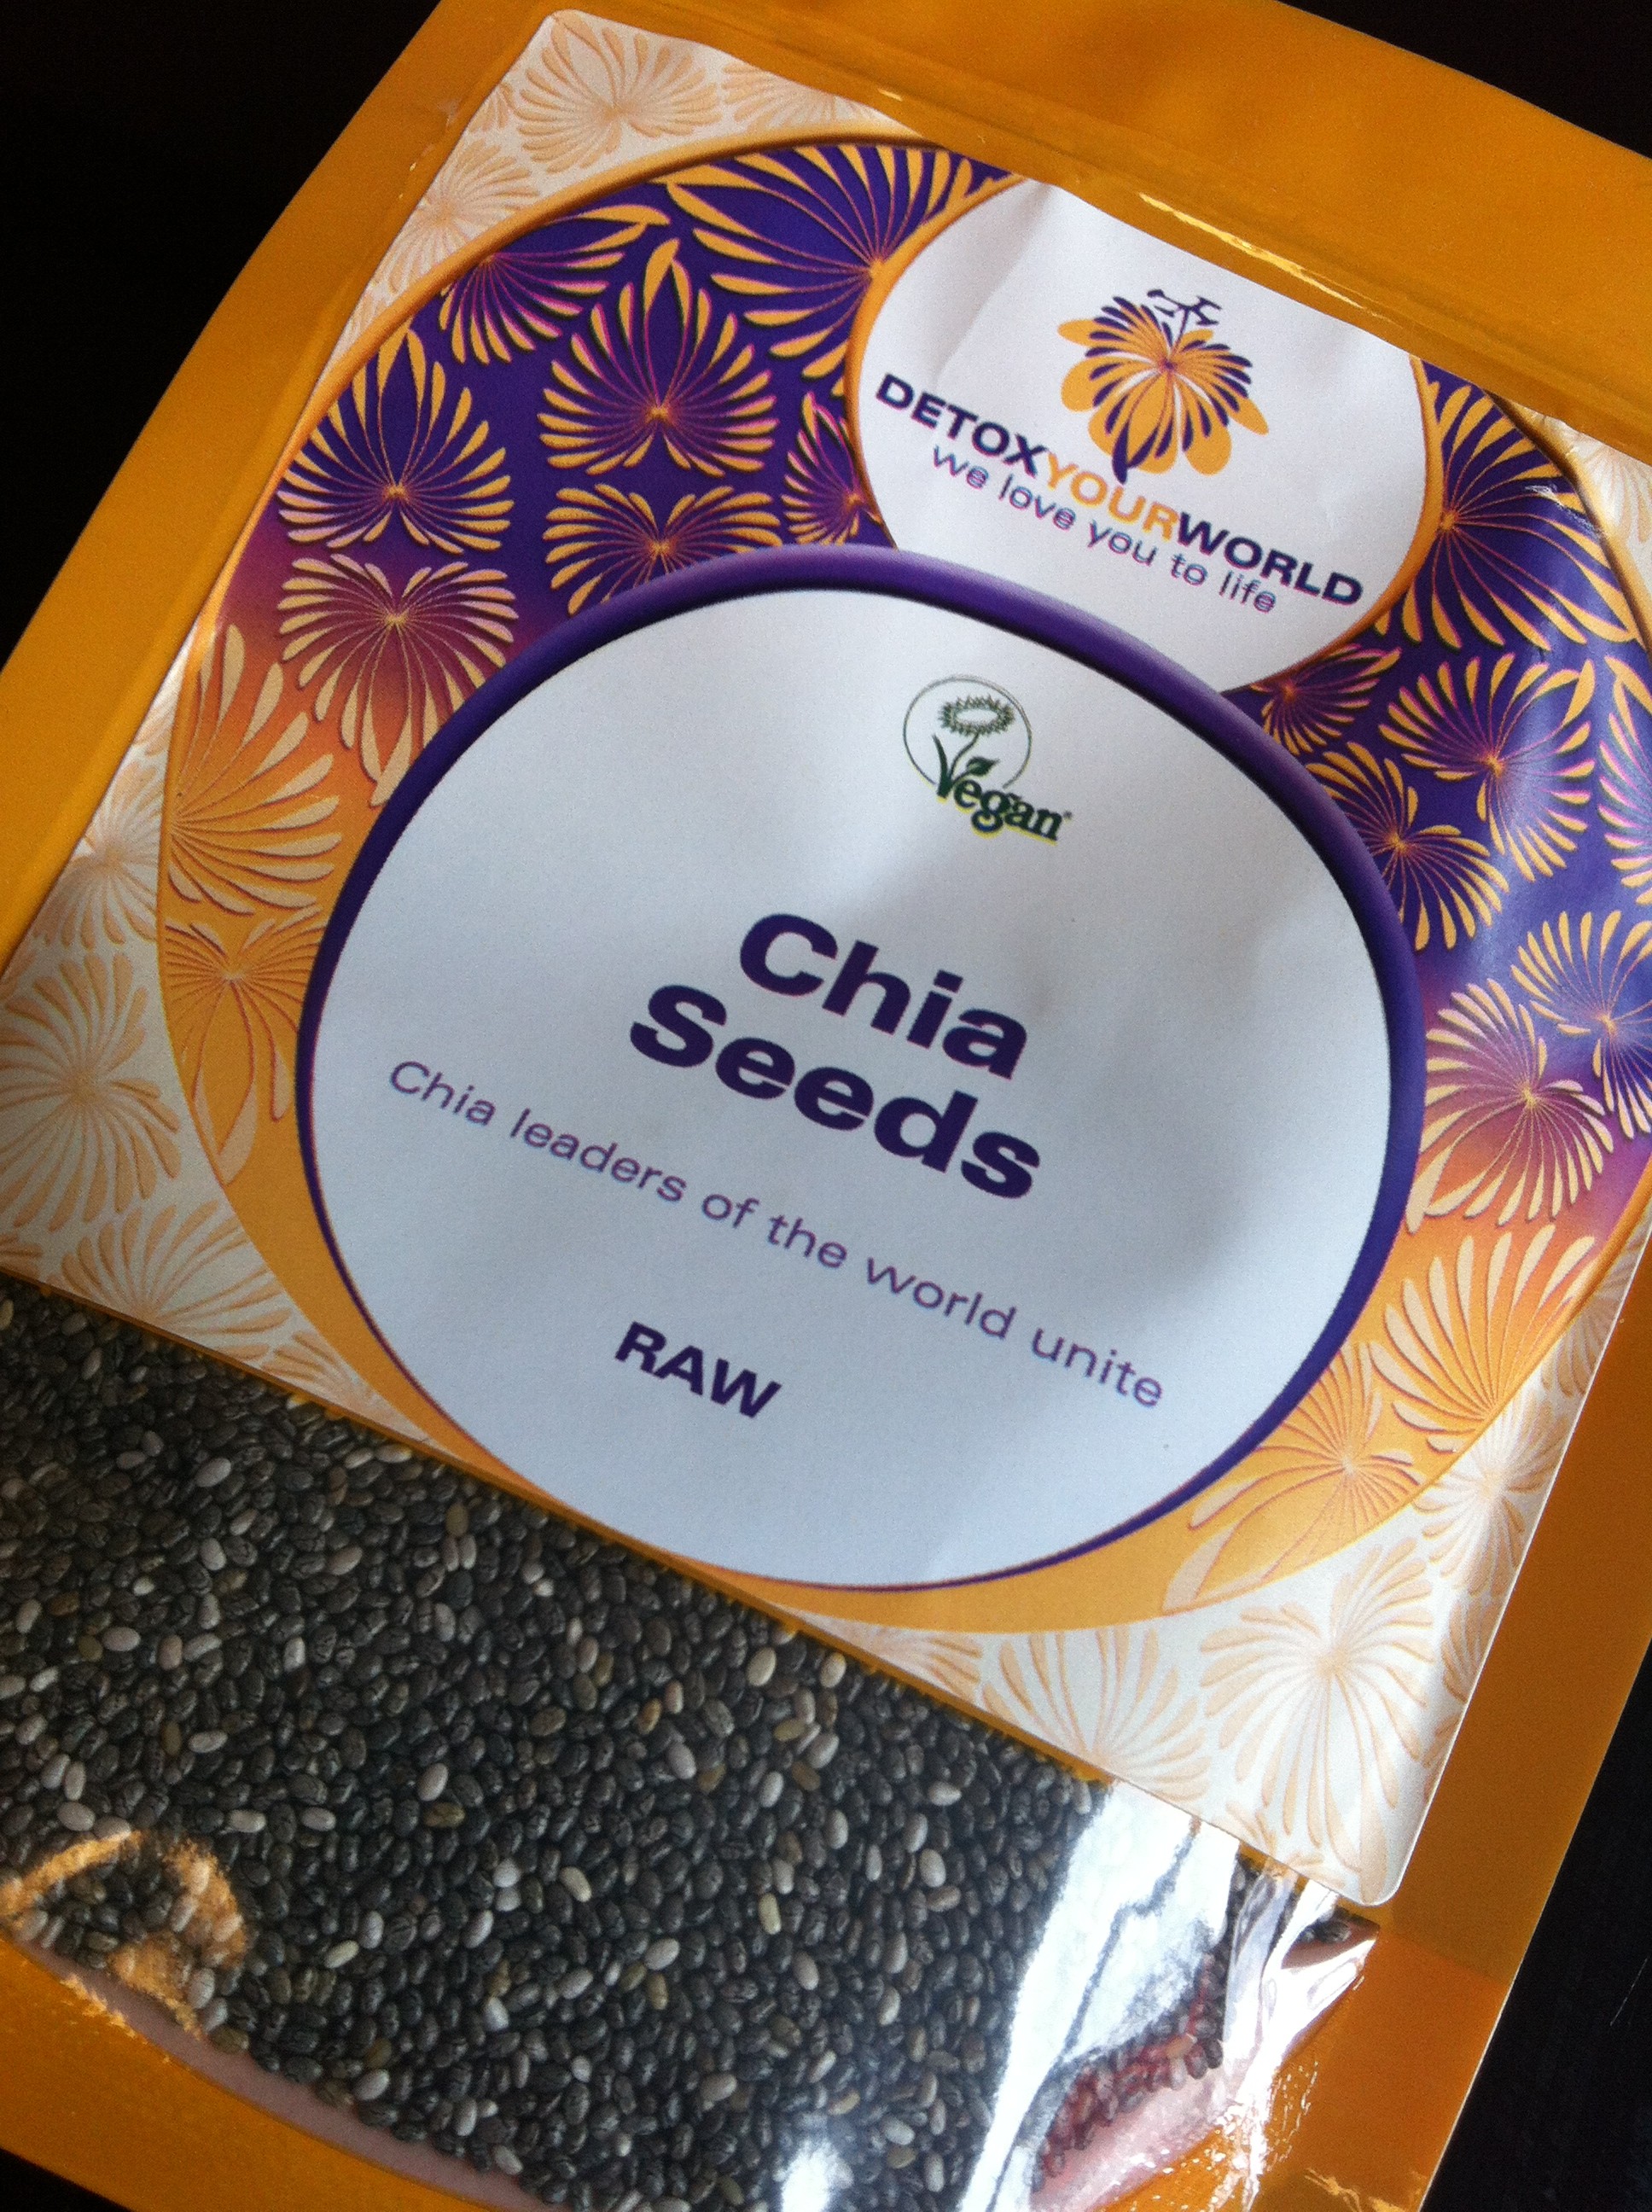 Chia Seeds from Detox Your World